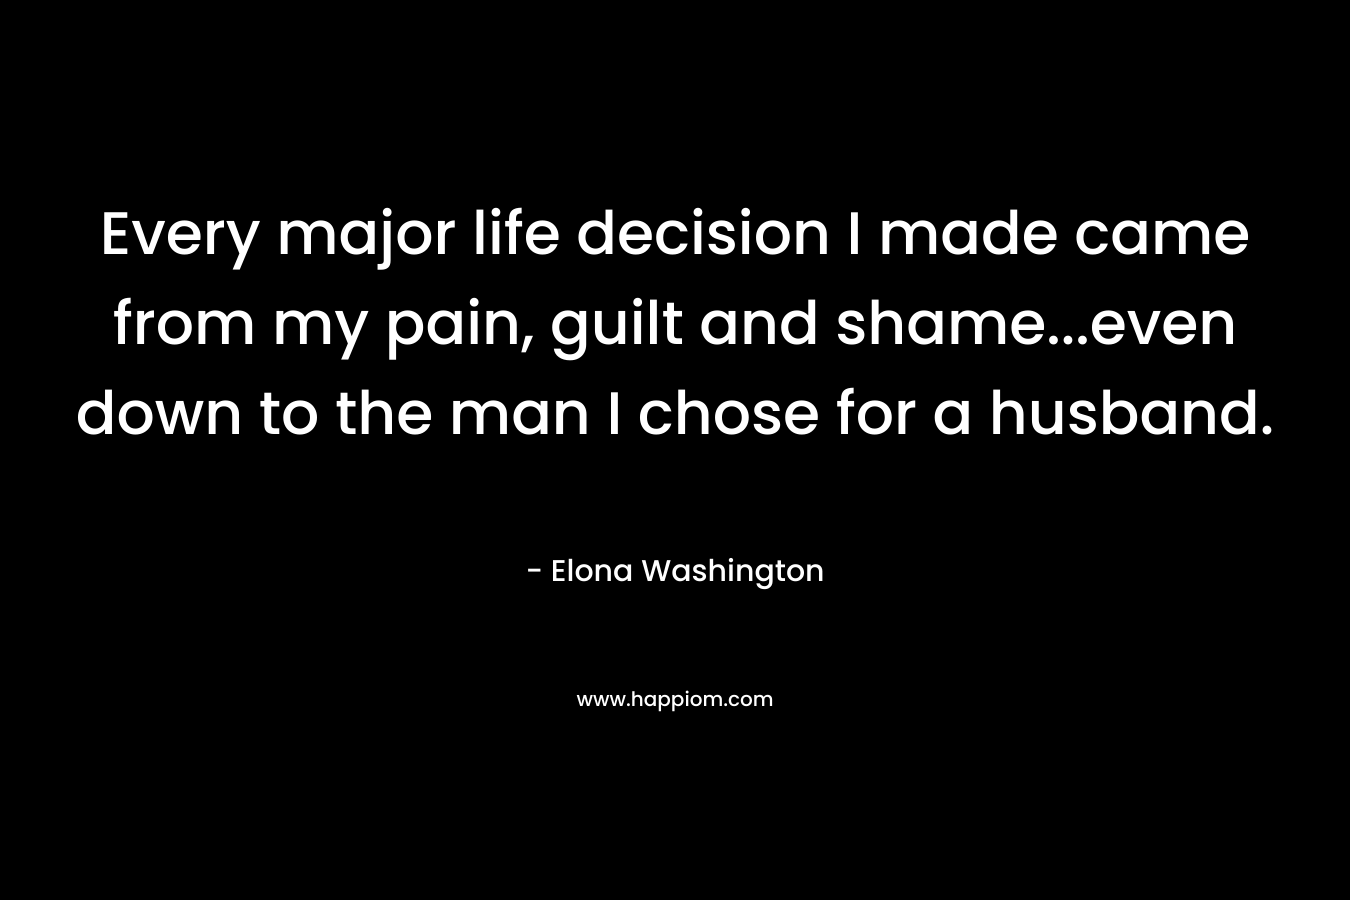 Every major life decision I made came from my pain, guilt and shame...even down to the man I chose for a husband.